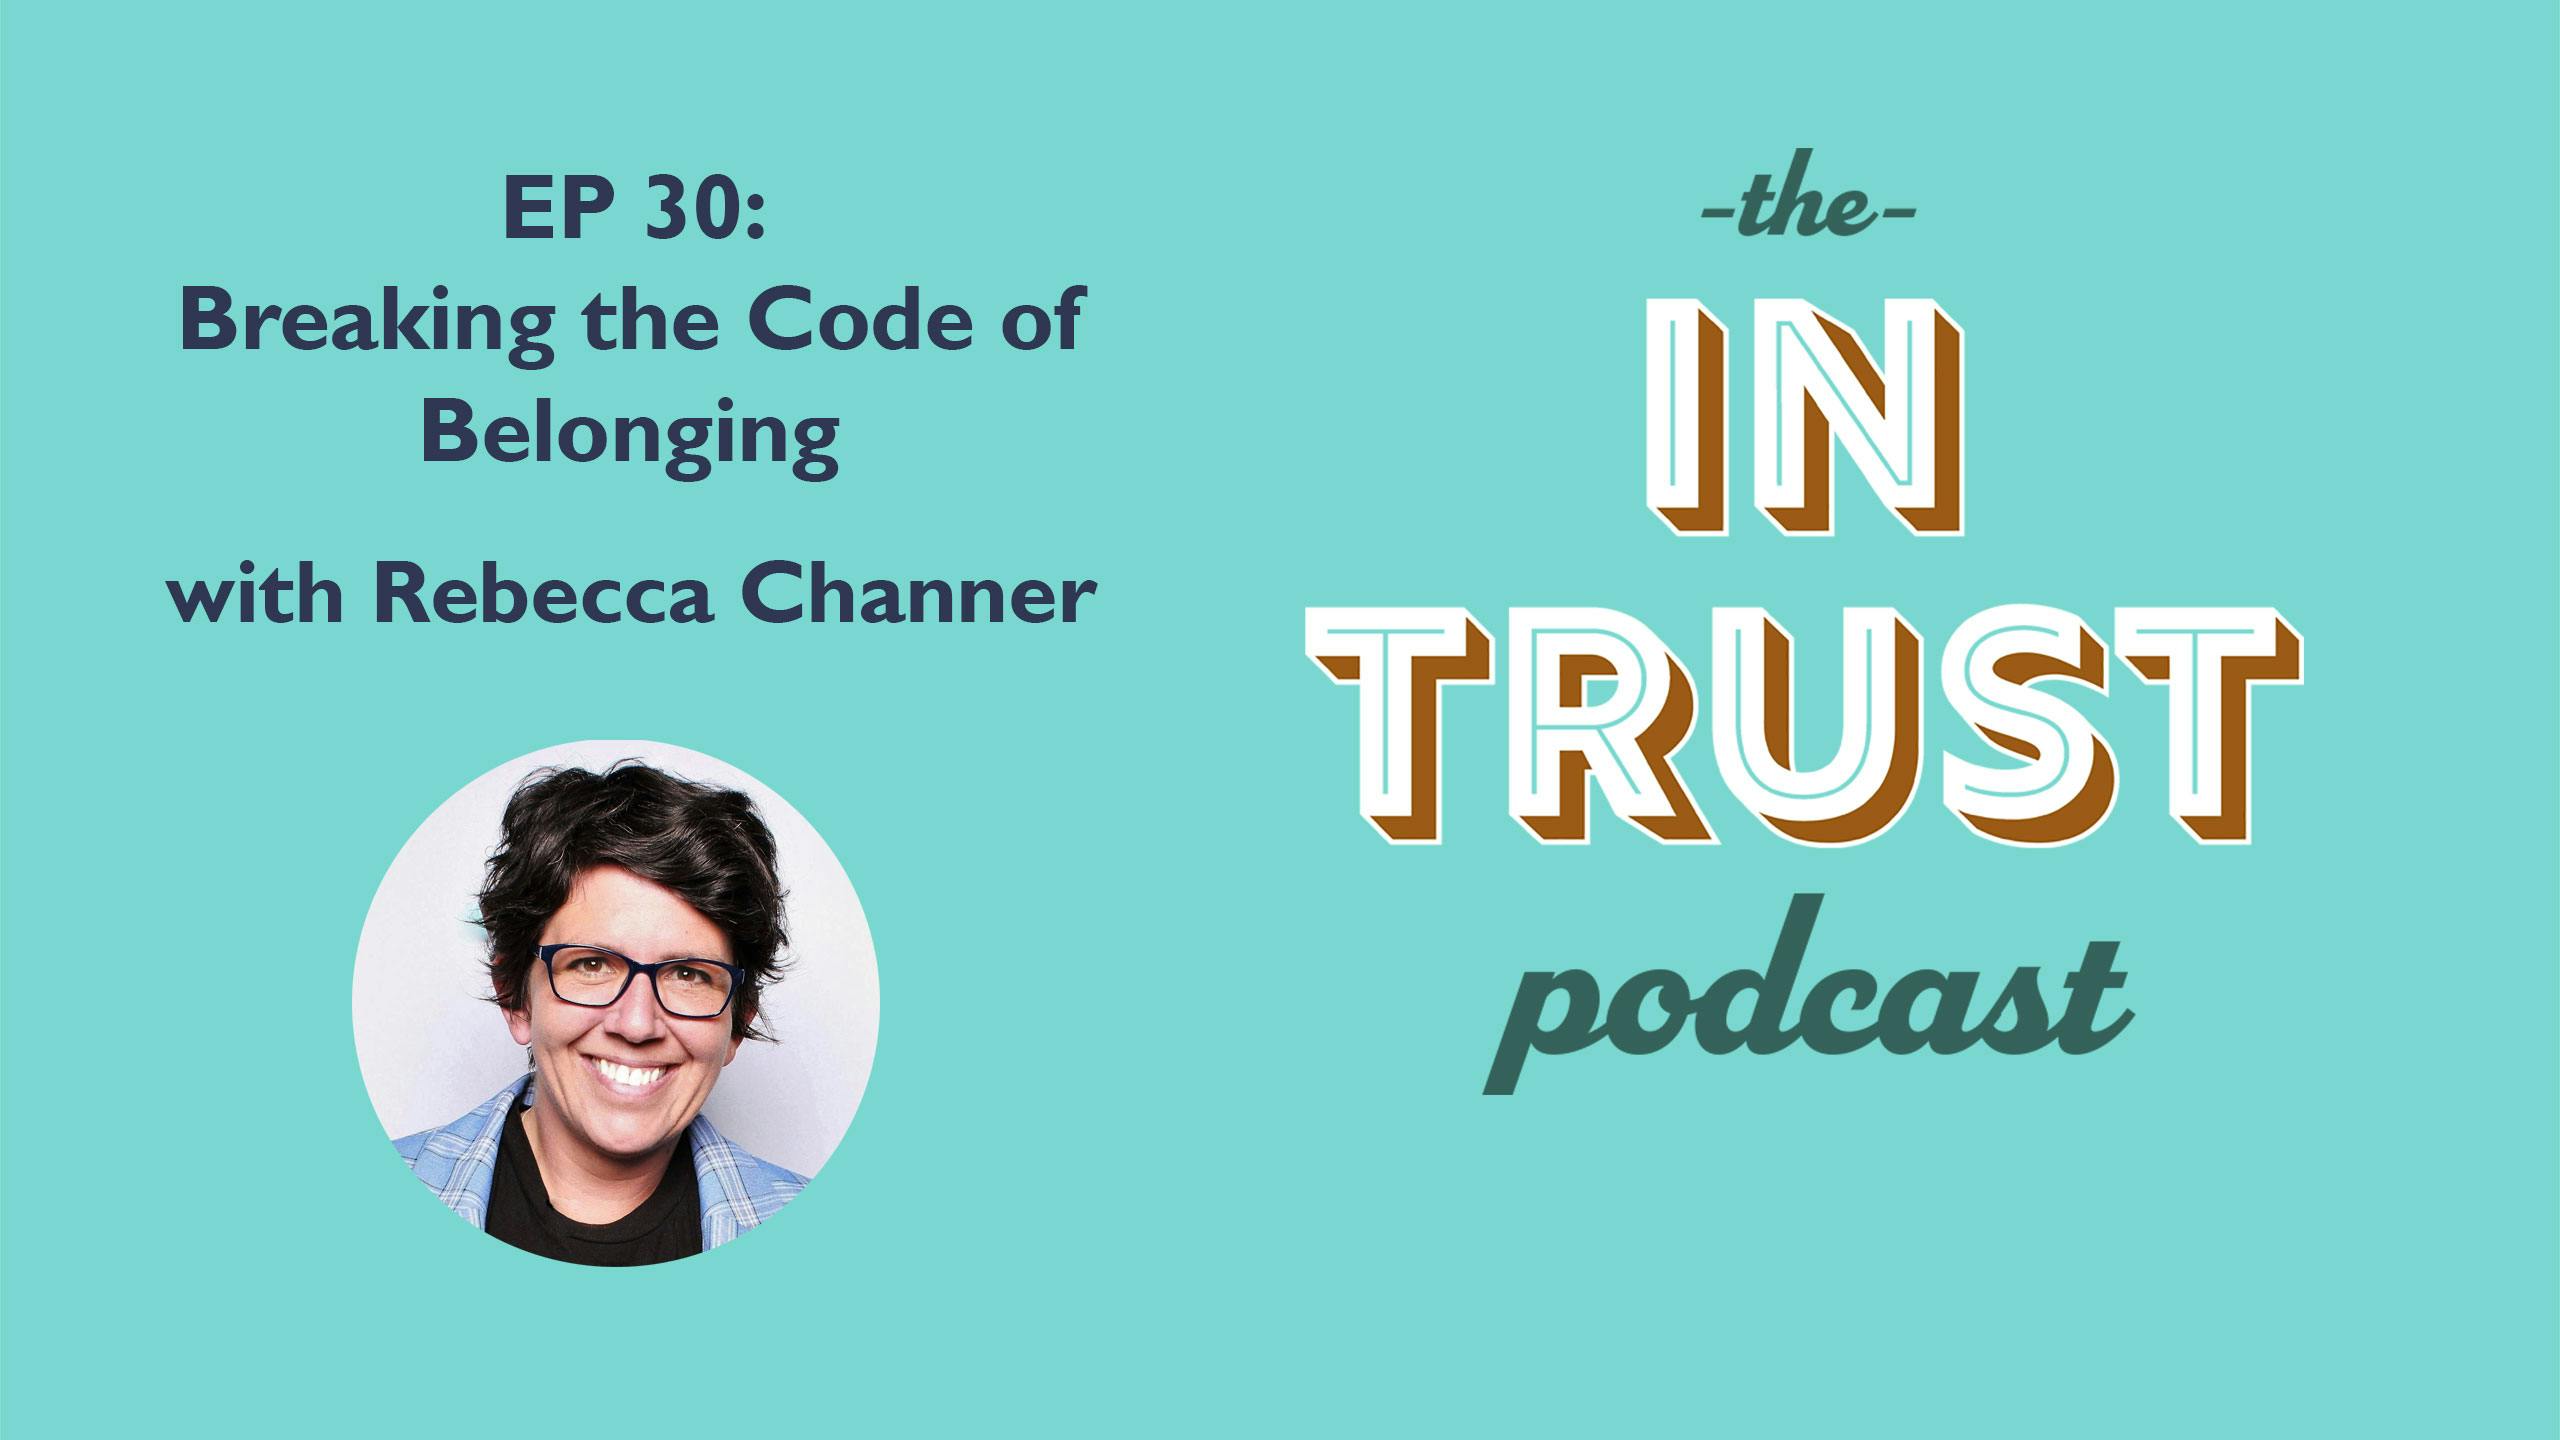 Episode art for In Trust podcast EP 30: Breaking the Code of Belonging with Rebecca Channer